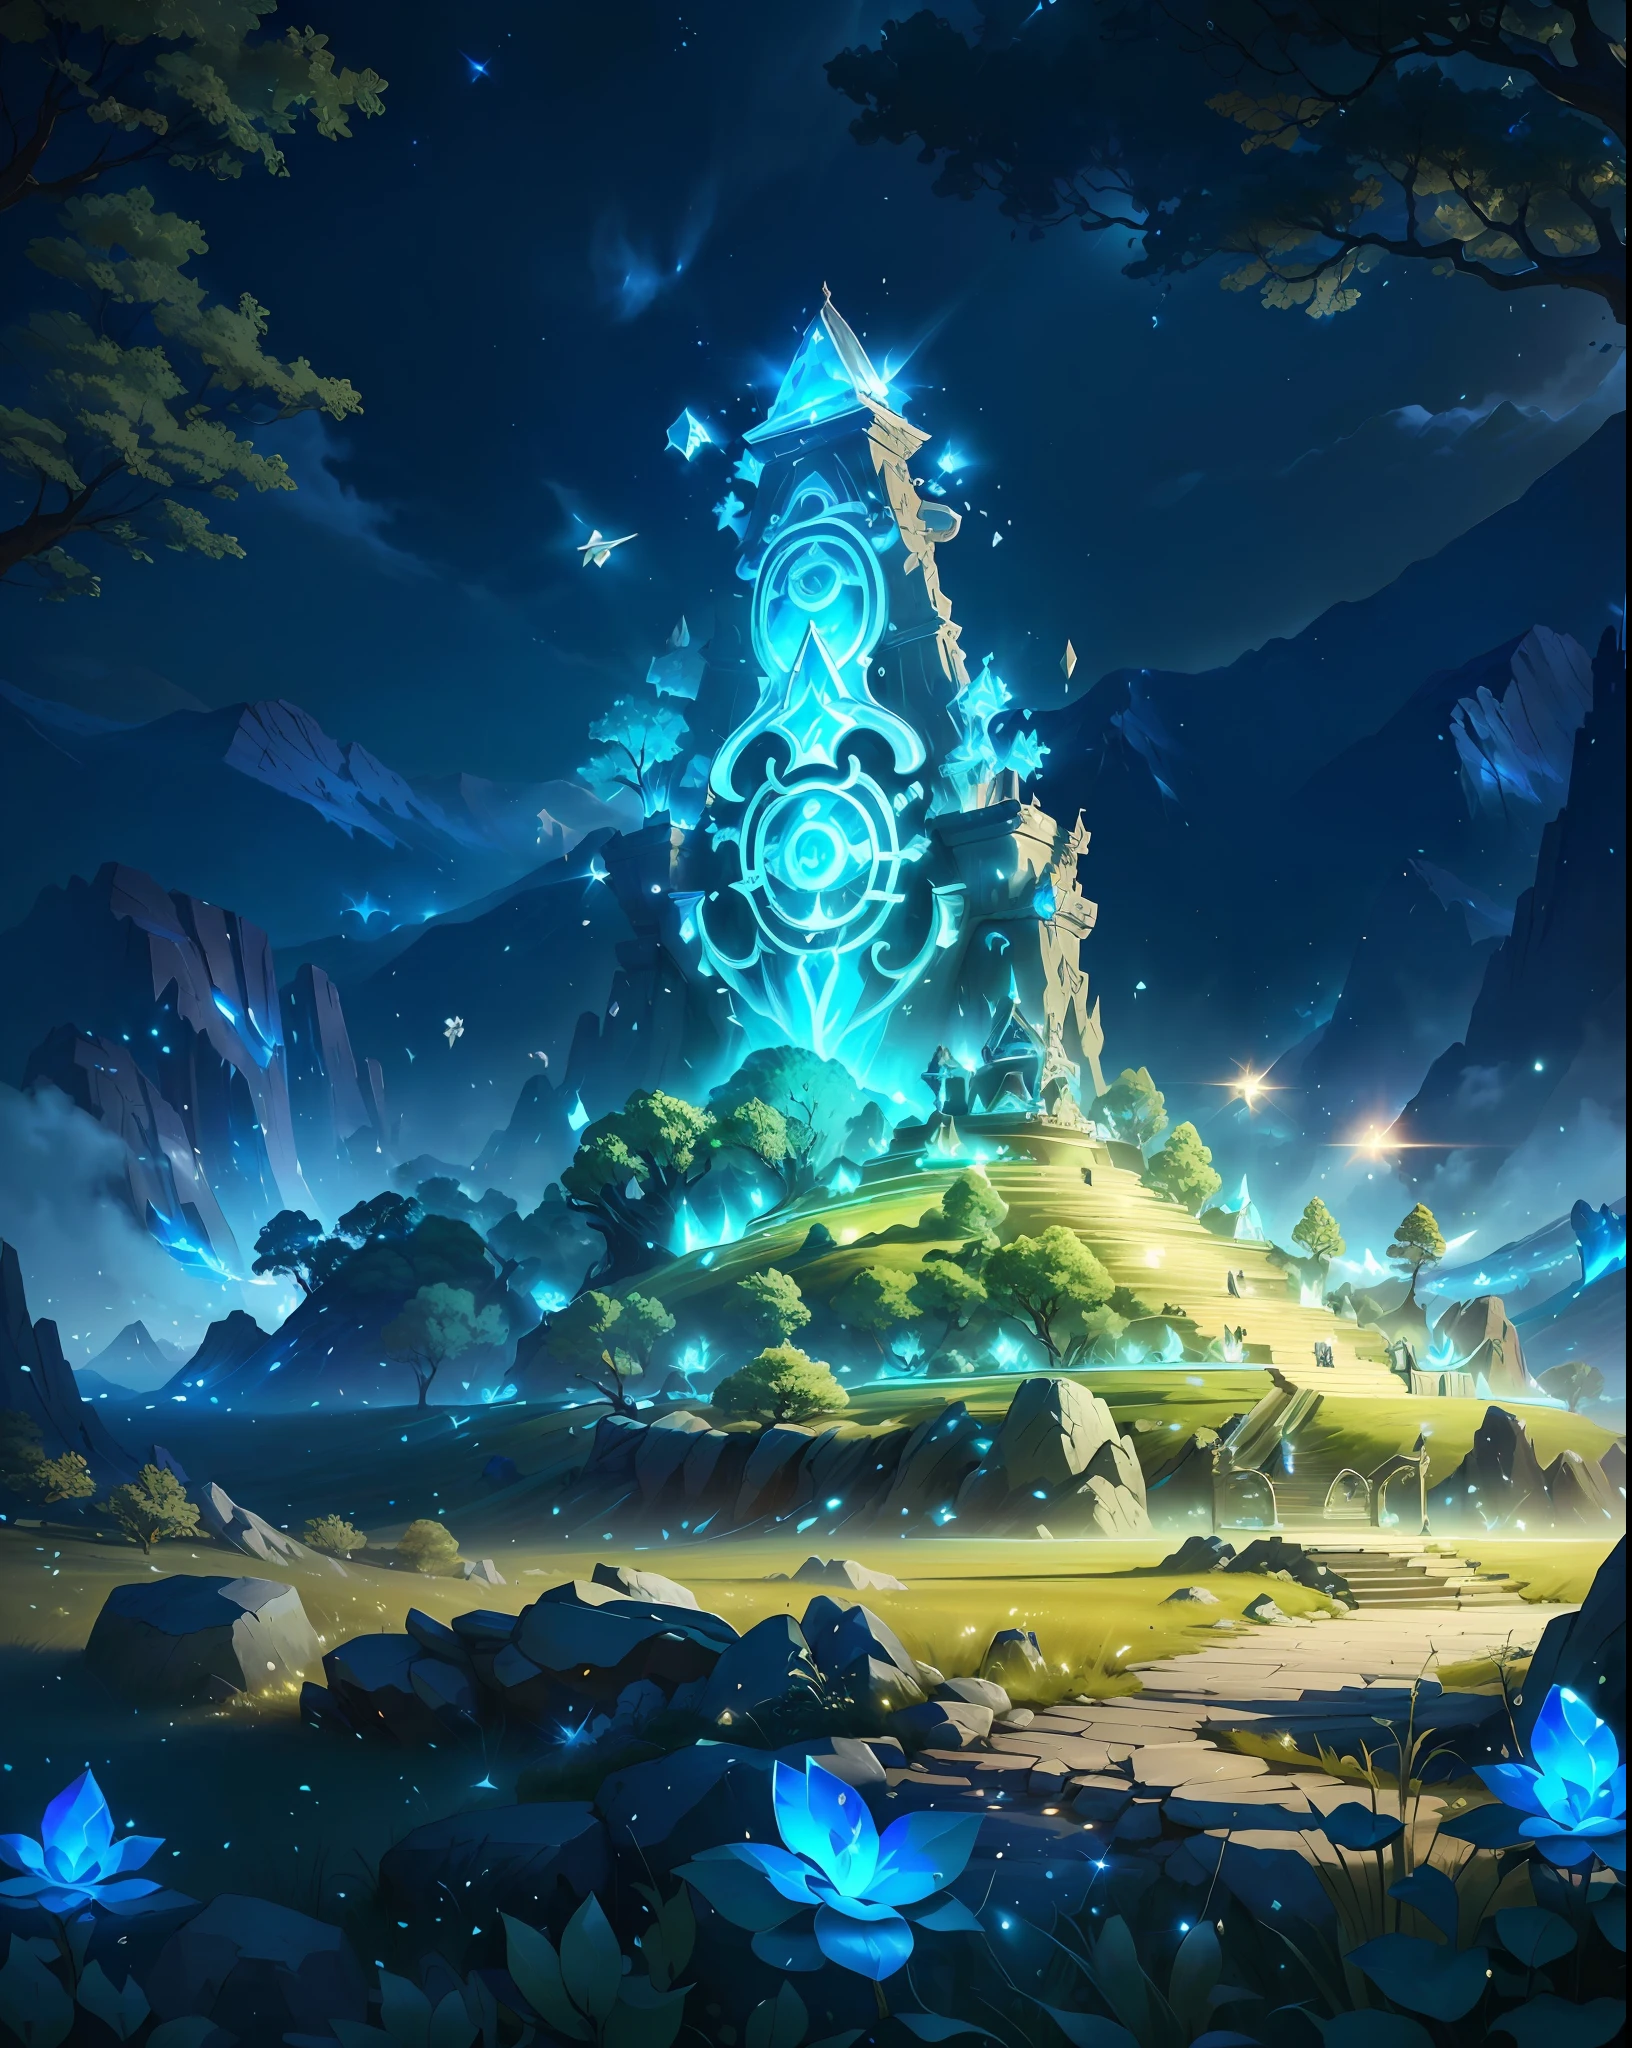 a picture taken from the ground of a mountain with a tree and a light up sign, elemental guardian of life, style of duelyst, concept art magical highlight, legend of korra setting, 8k hd wallpaperjpeg artifact, 8 k hd wallpaperjpeg artifact, mythical cosmic shrine, luminescent concept art, stylized concept art